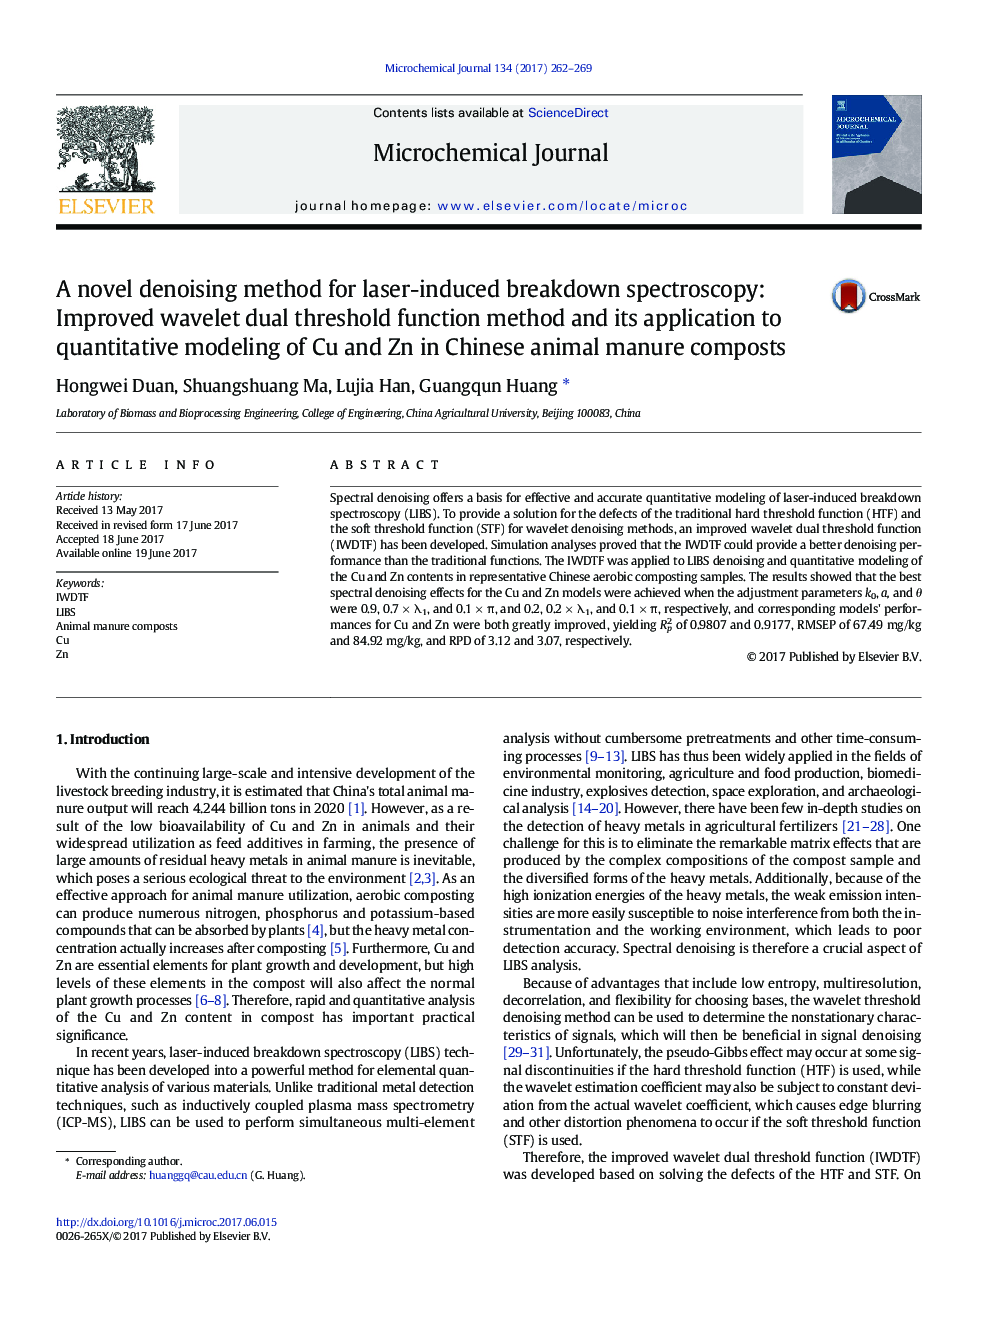 A novel denoising method for laser-induced breakdown spectroscopy: Improved wavelet dual threshold function method and its application to quantitative modeling of Cu and Zn in Chinese animal manure composts